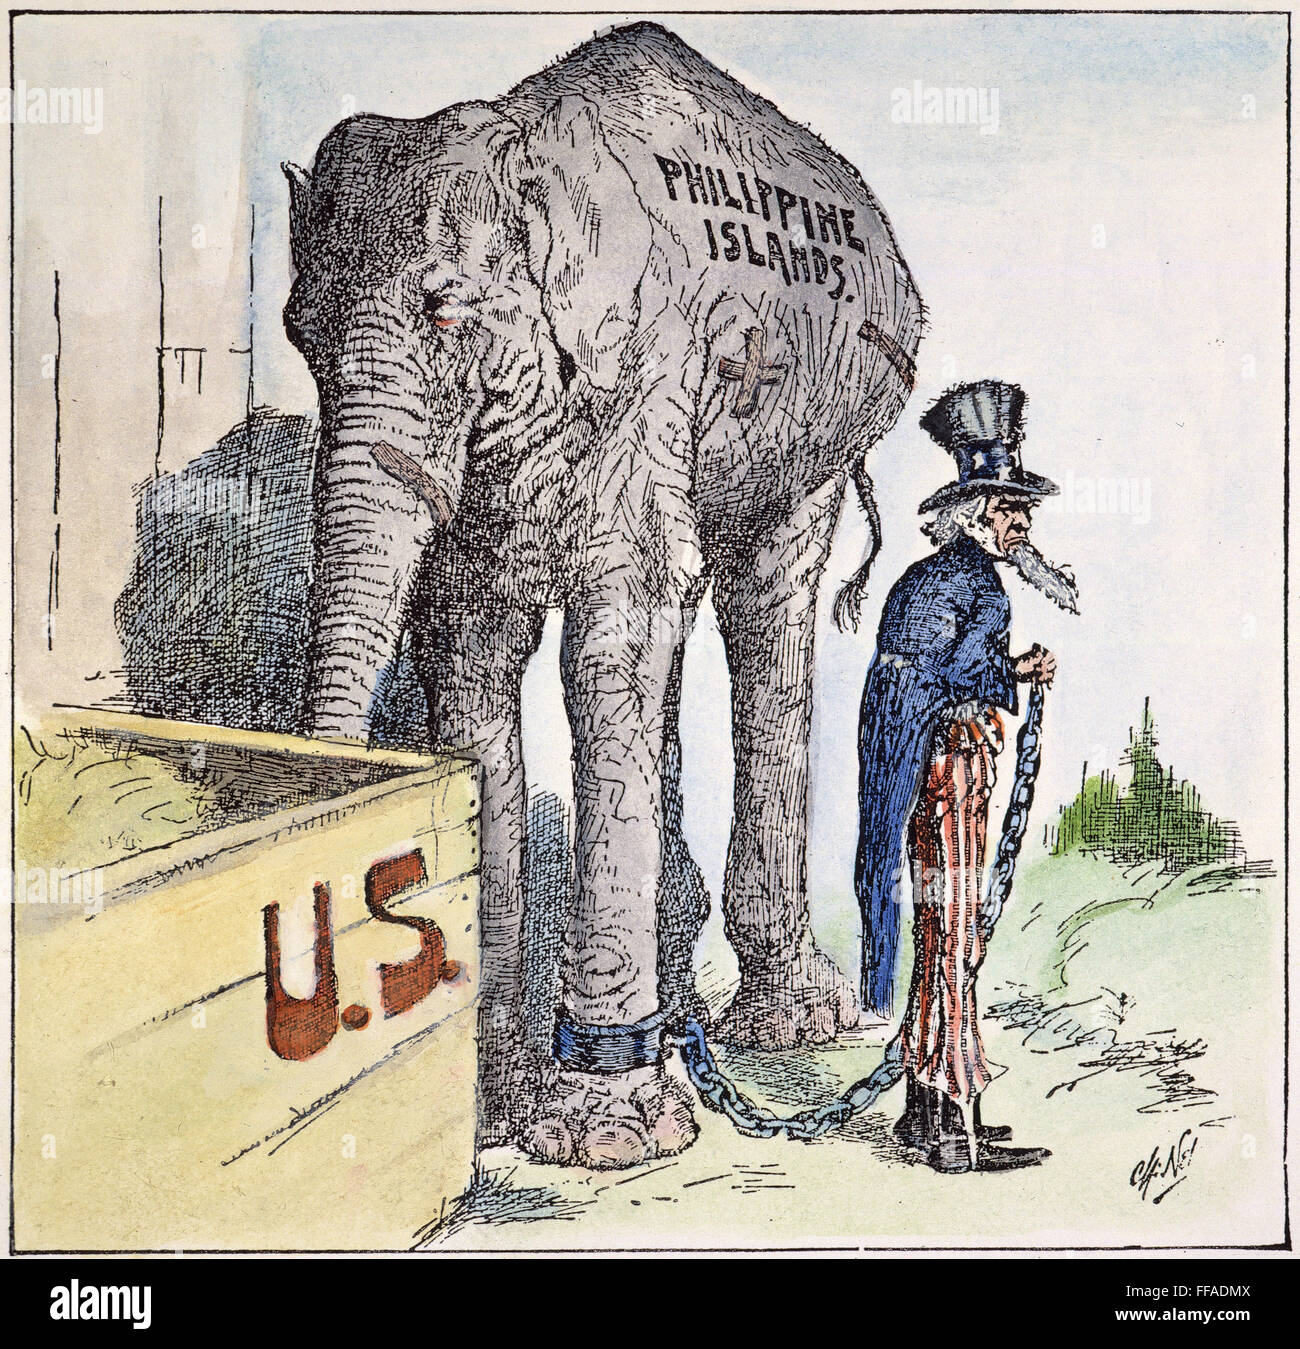 PHILIPPIINES CARTOON, 1898 /nWhat Will He Do With it?: Having acquired the Philippines, Uncle Sam ponders how to deal with that country: American cartoon, 1898, by Charles Nelan. Stock Photo